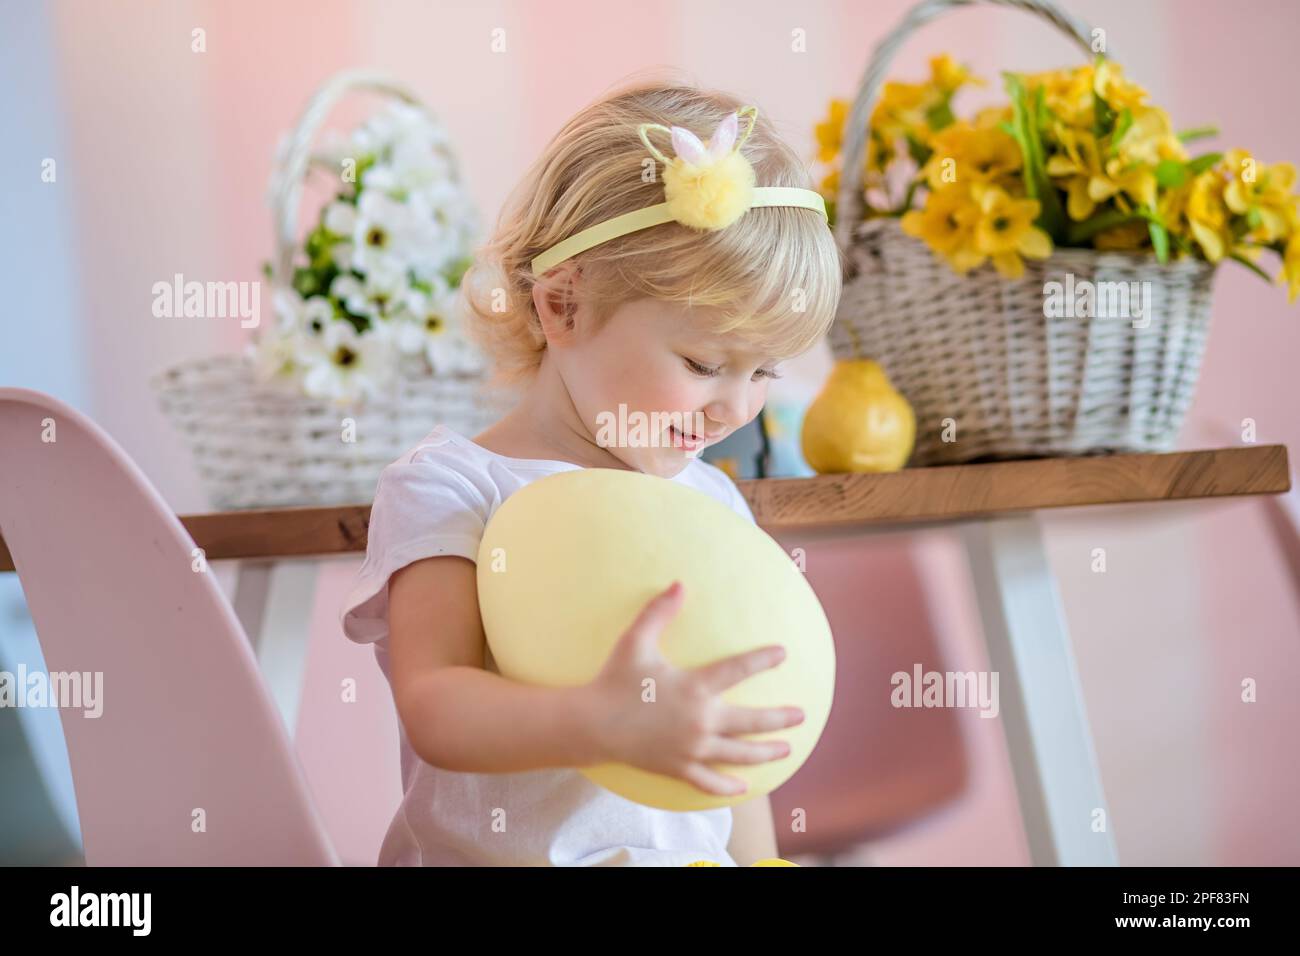 Easter egg hunt at home. Adorable happy little blonde girl with short hair in a white dress holding a huge painted Easter egg Stock Photo